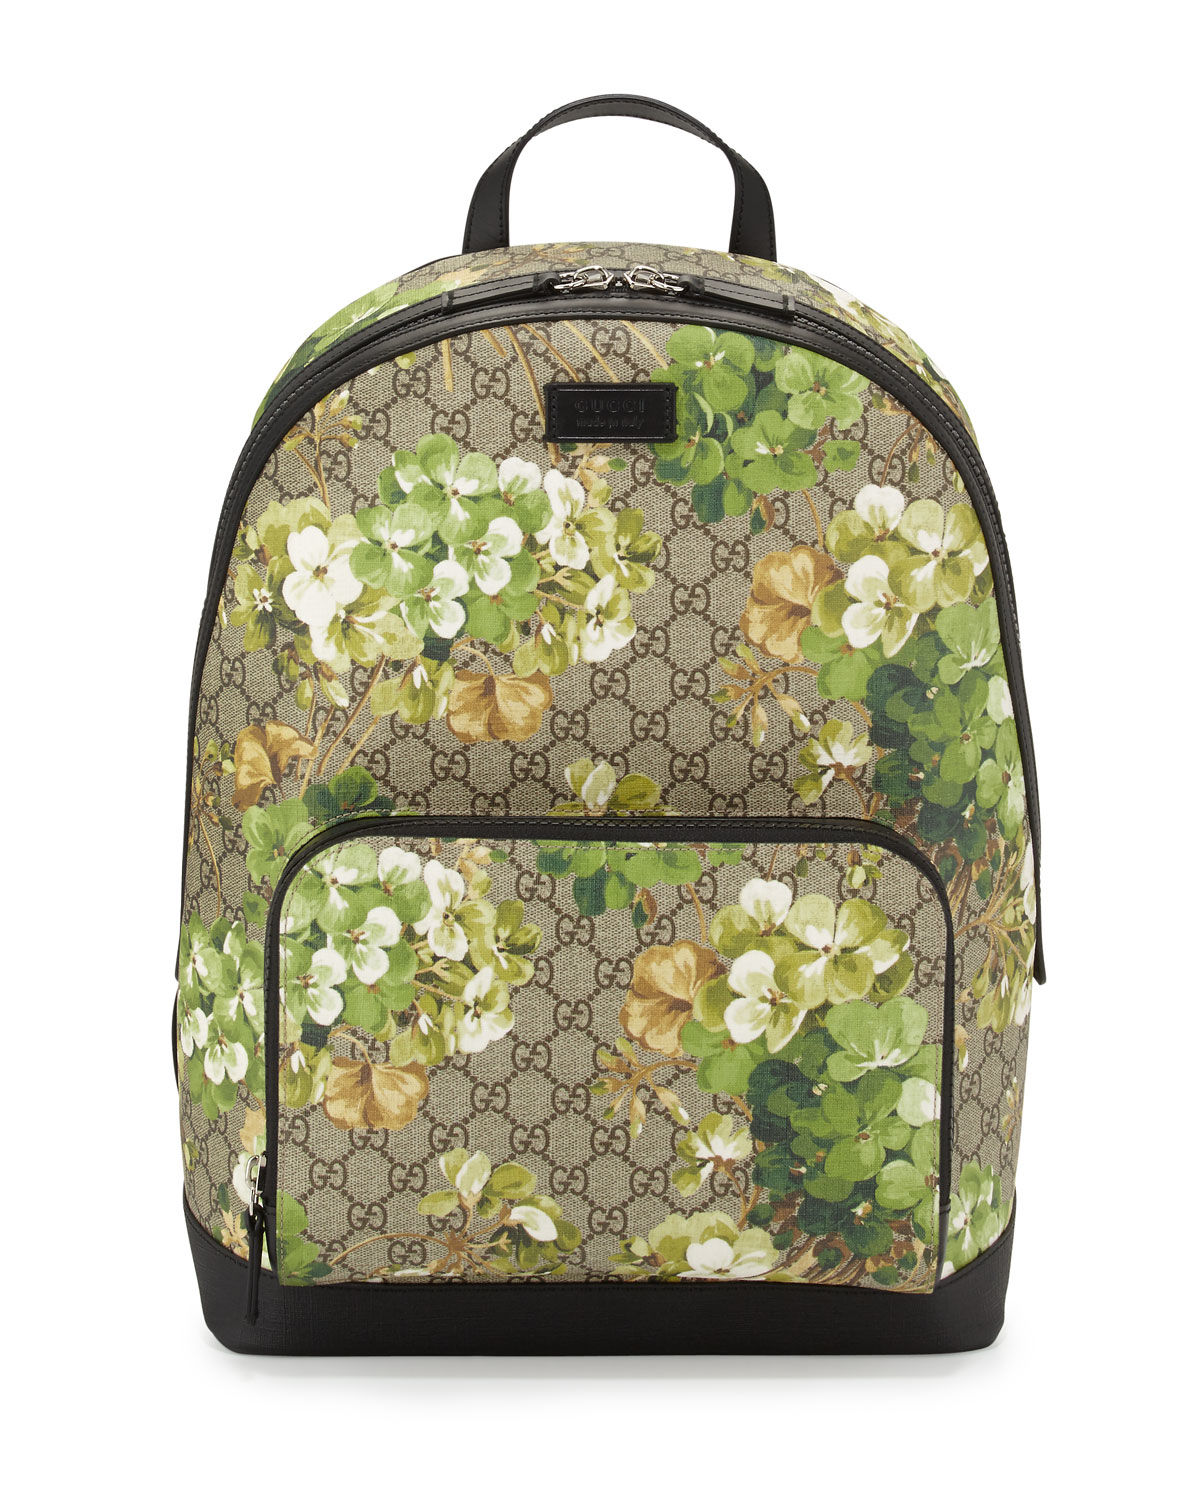 Gucci Gg Blooms Canvas Backpack in Blue - Lyst